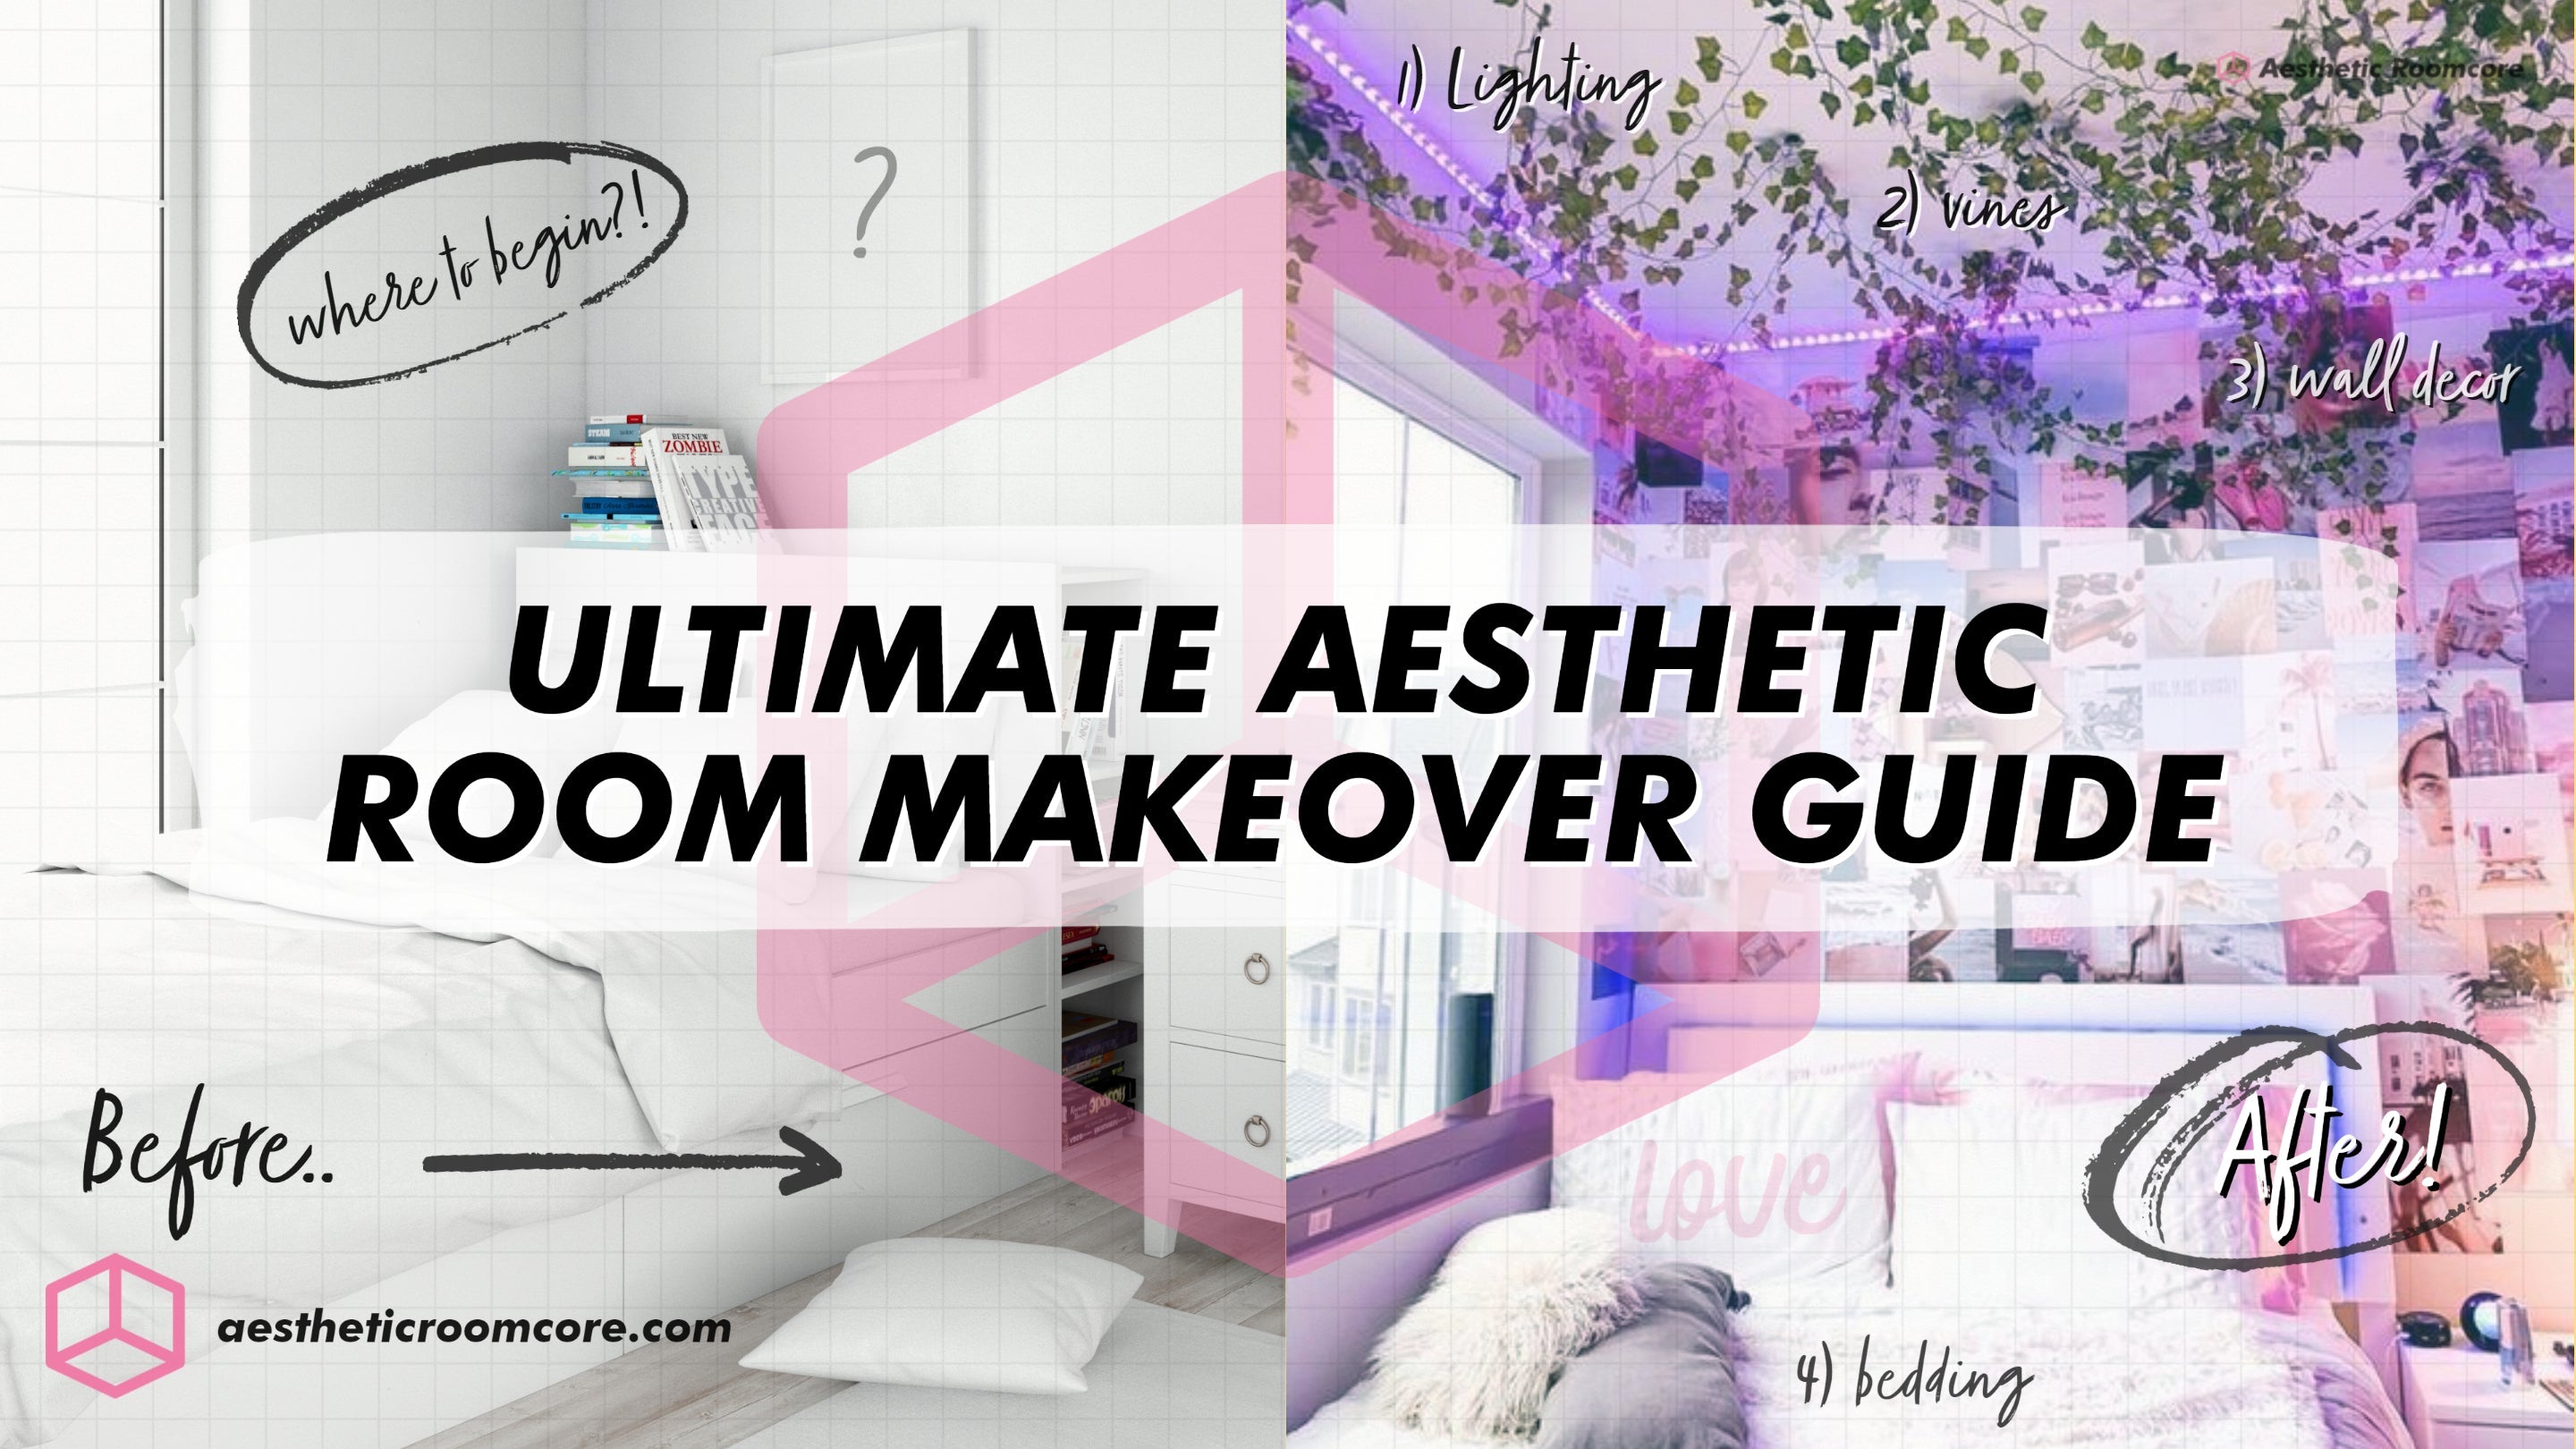 Ultimate Aesthetic Room Makeover Guide | Aesthetic Roomcore